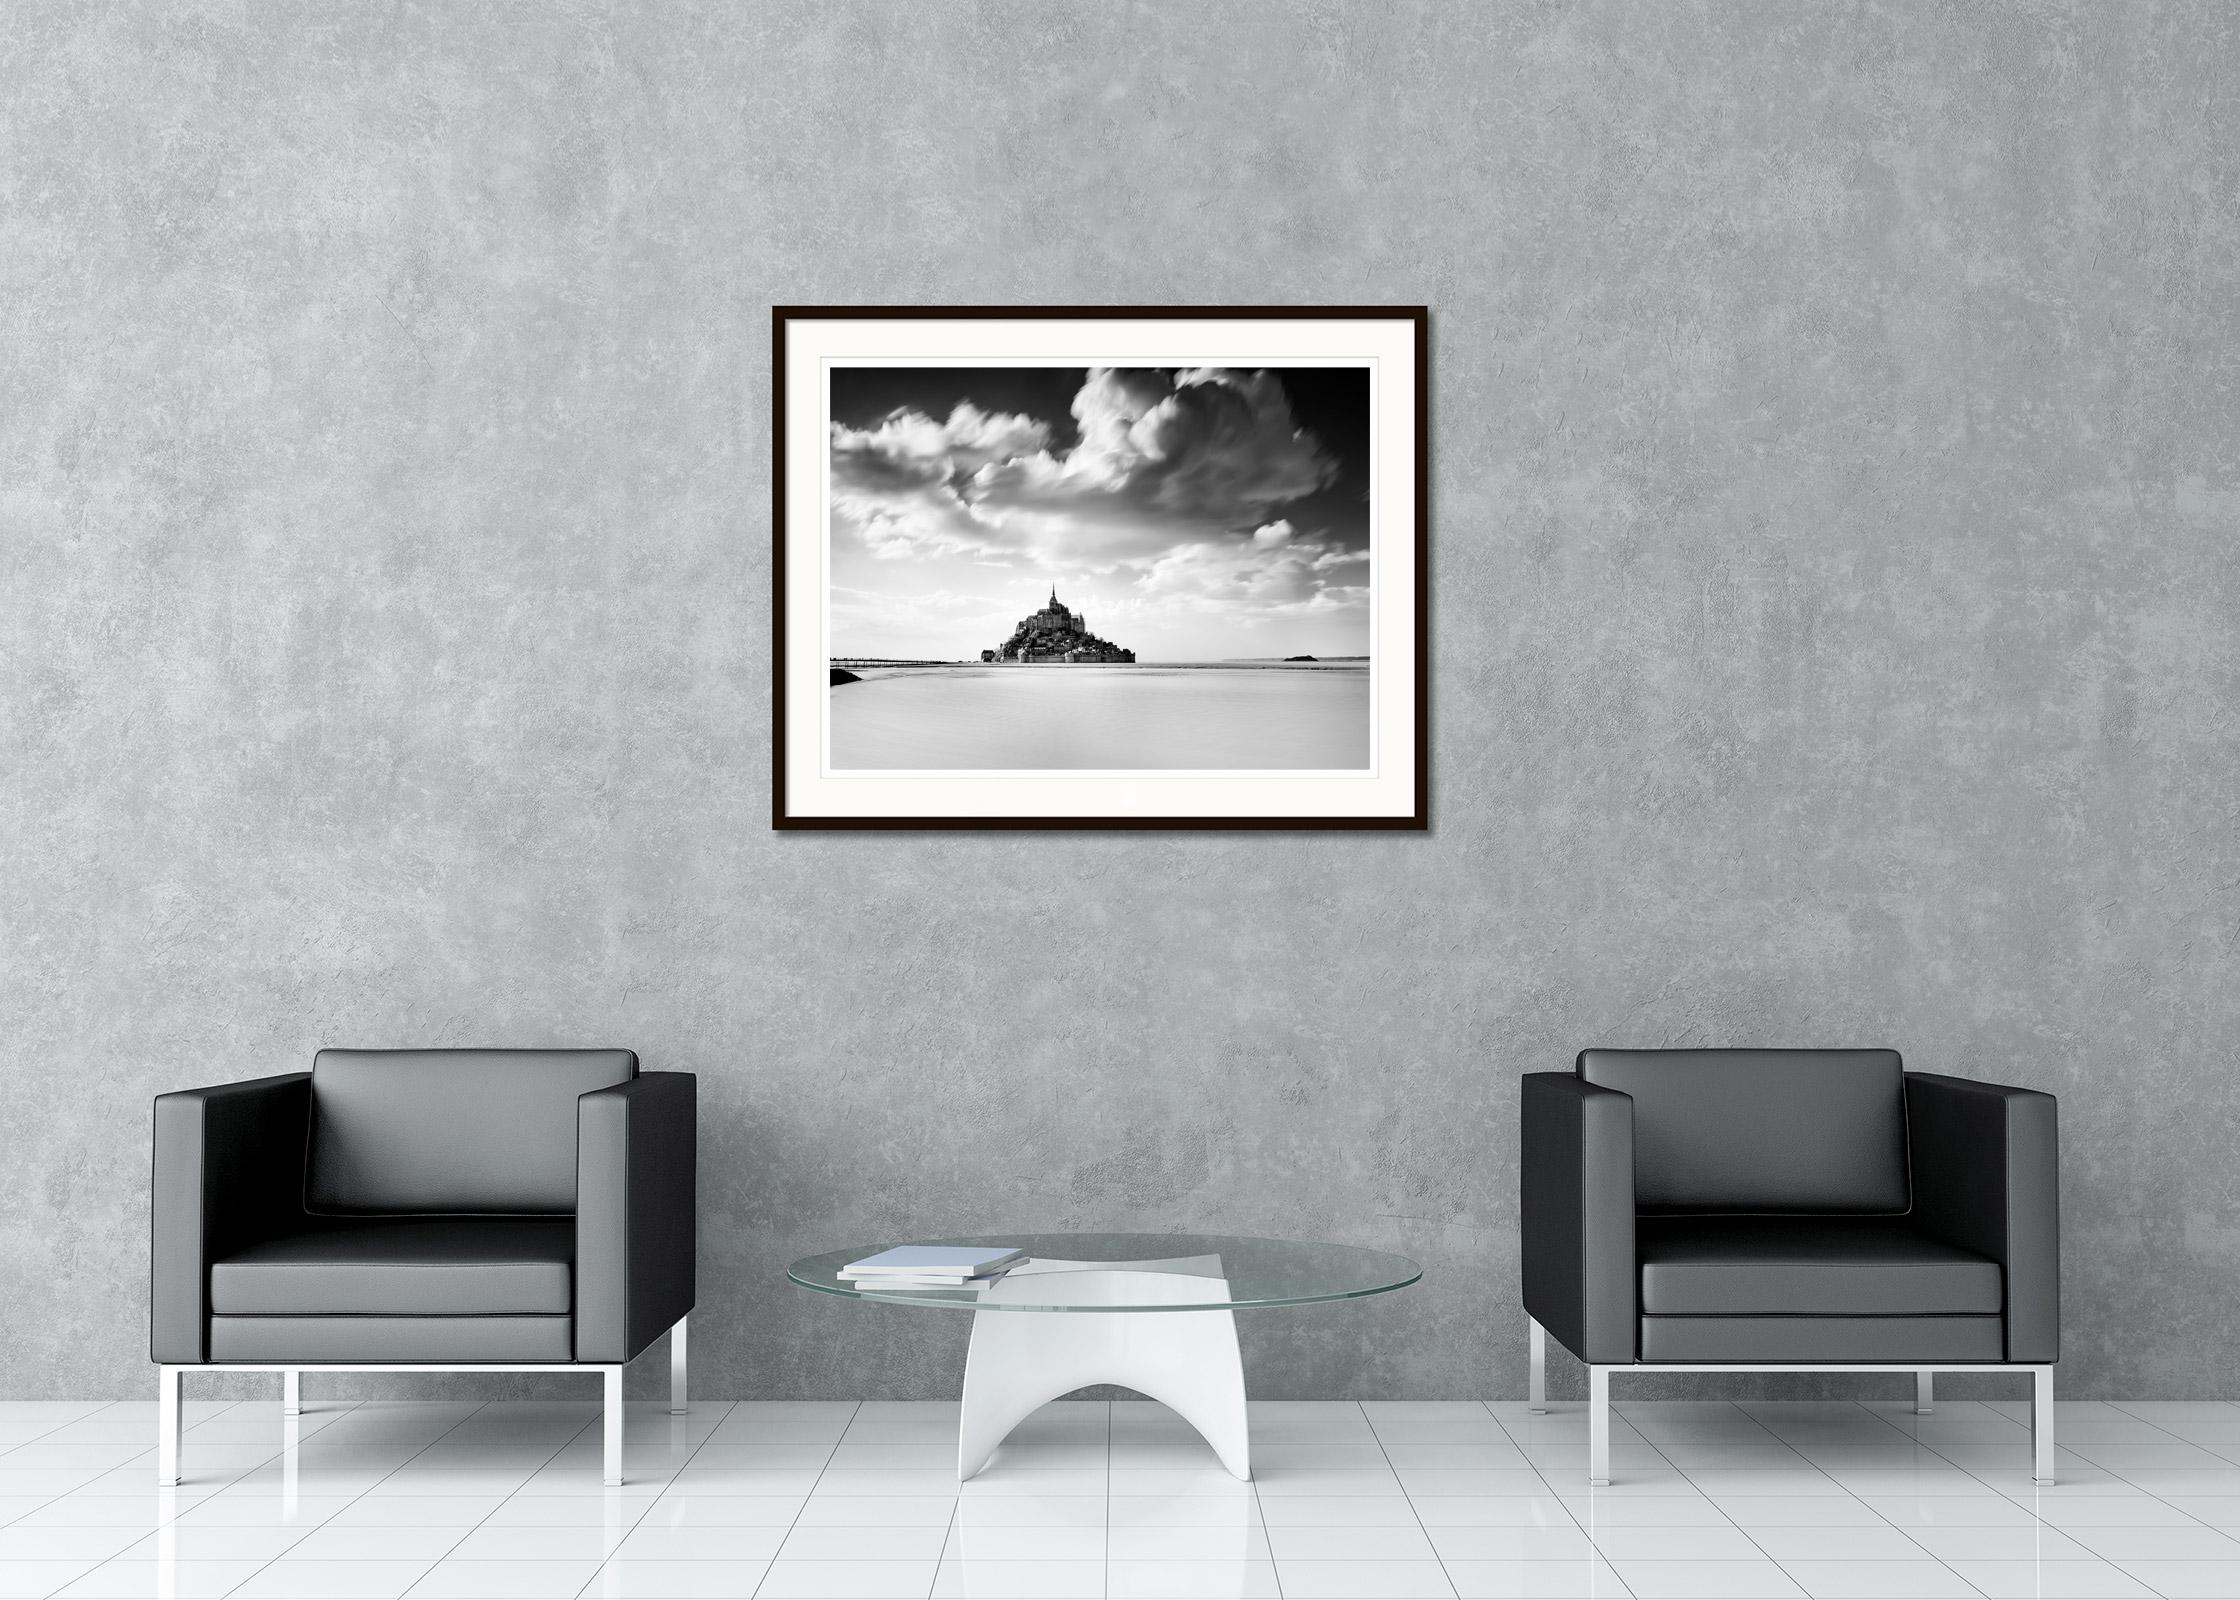 Black and White fine art landscape photography. Archival pigment ink print, edition of 7. Signed, titled, dated and numbered by artist. Certificate of authenticity included. Printed with 4cm white border. International award winner photographer -